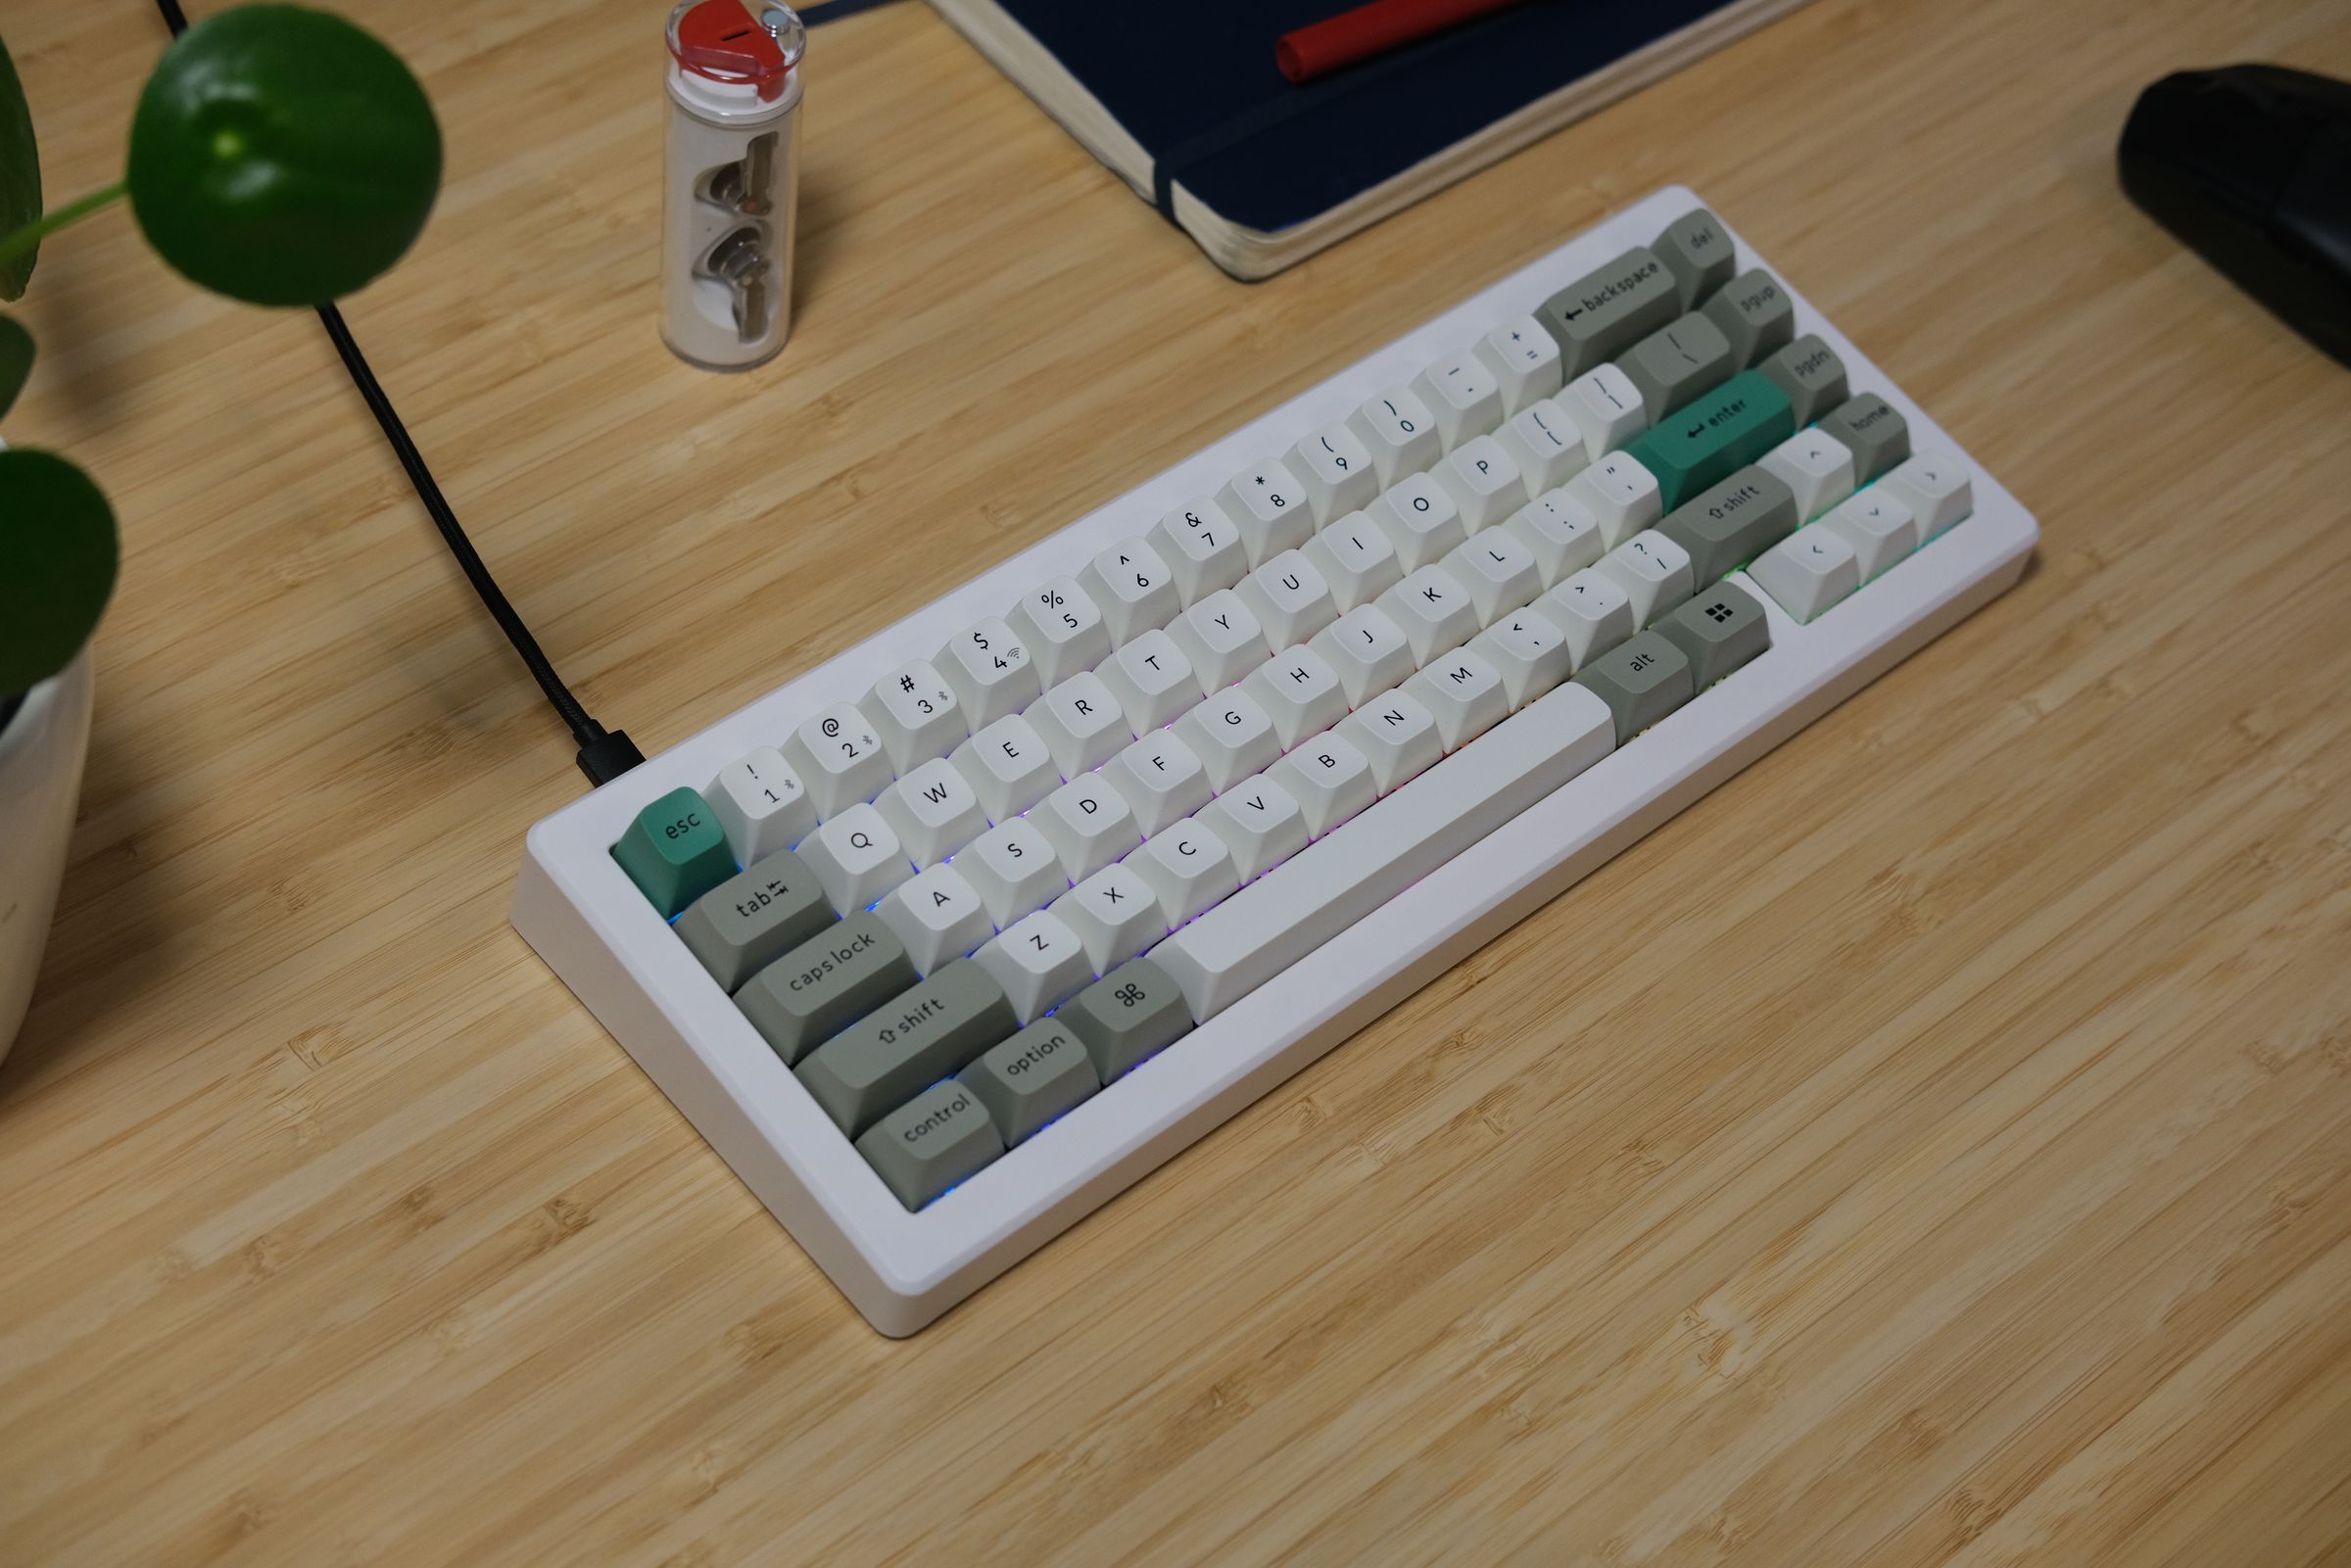 CSTM65 with white, gray, and green keycaps and a white case.